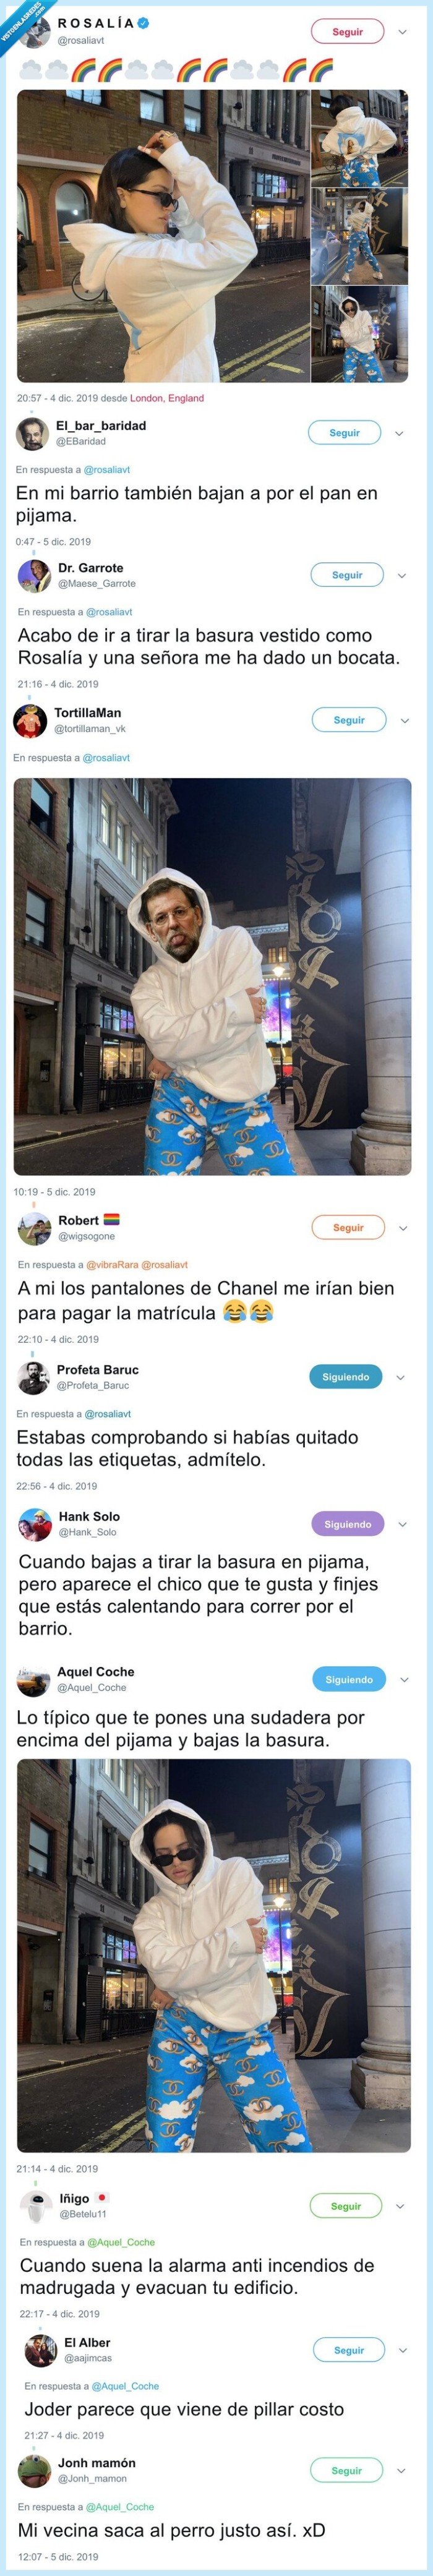 rosalía,pijama,channel,calle